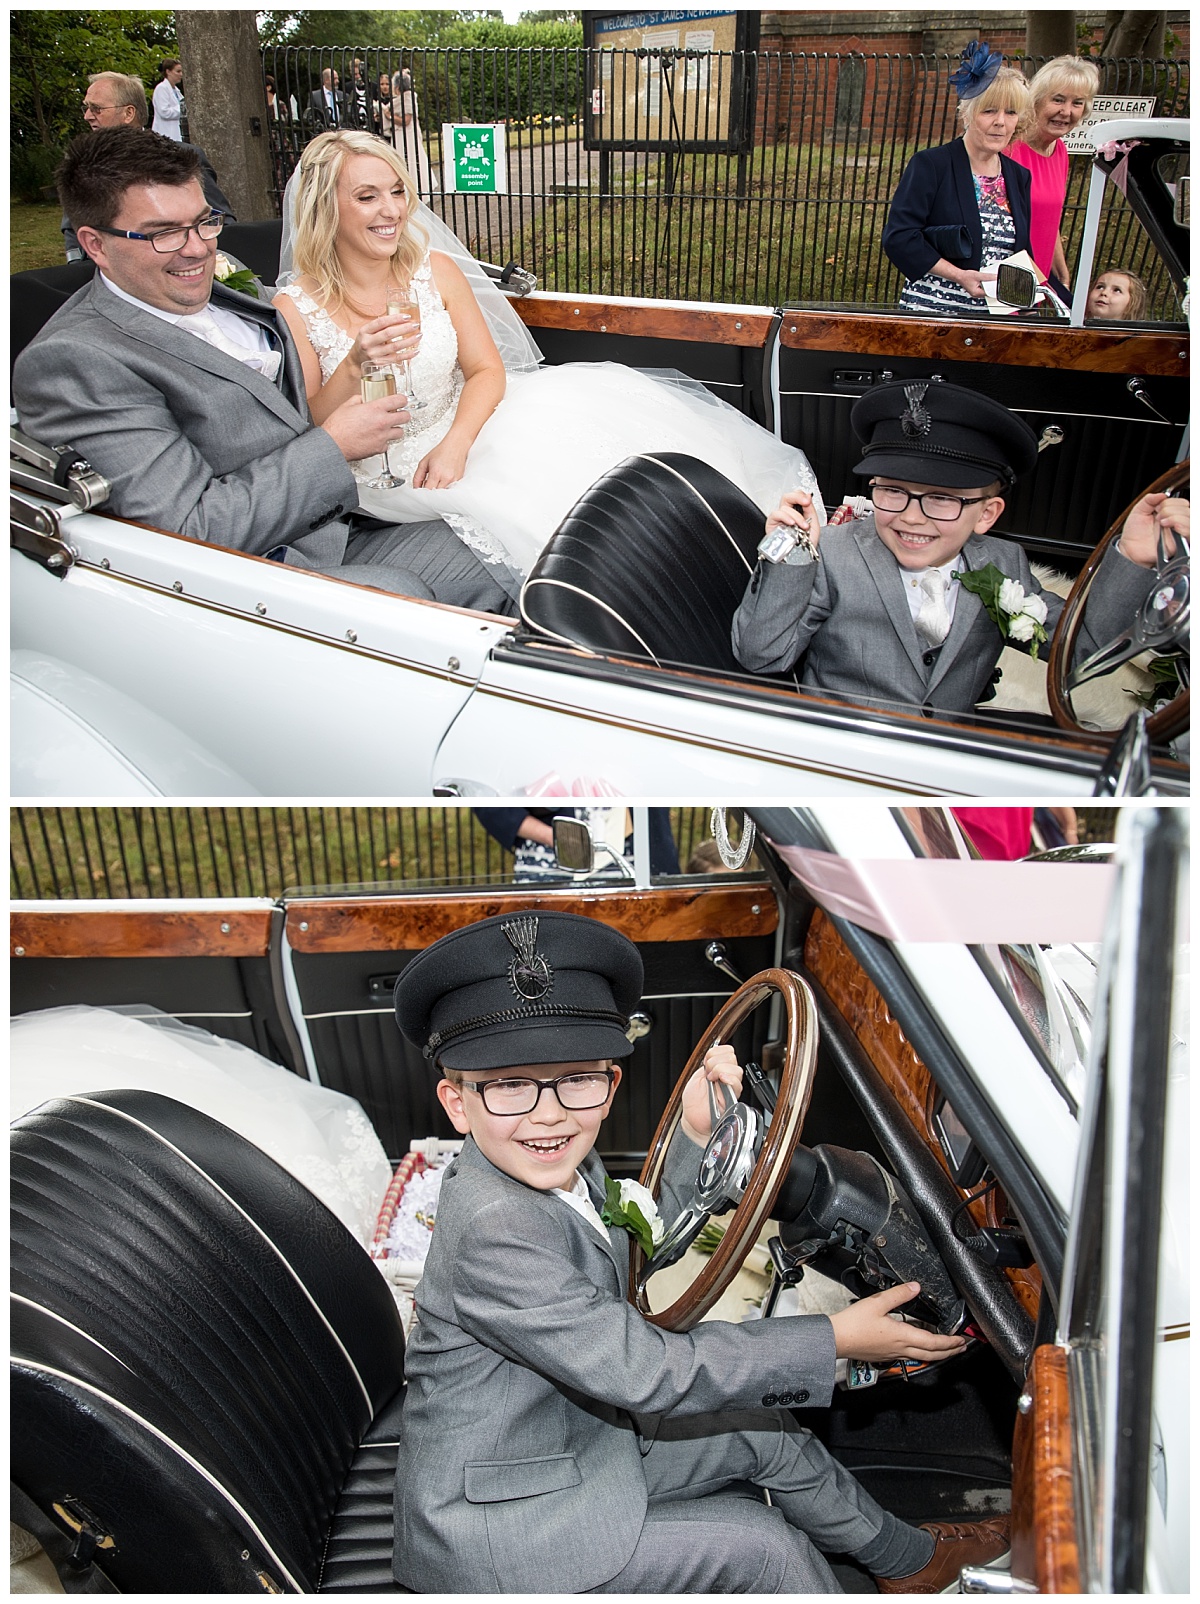 Wedding Photography Manchester - Lisa and James's The Three Horseshoes Country Inn wedding 23